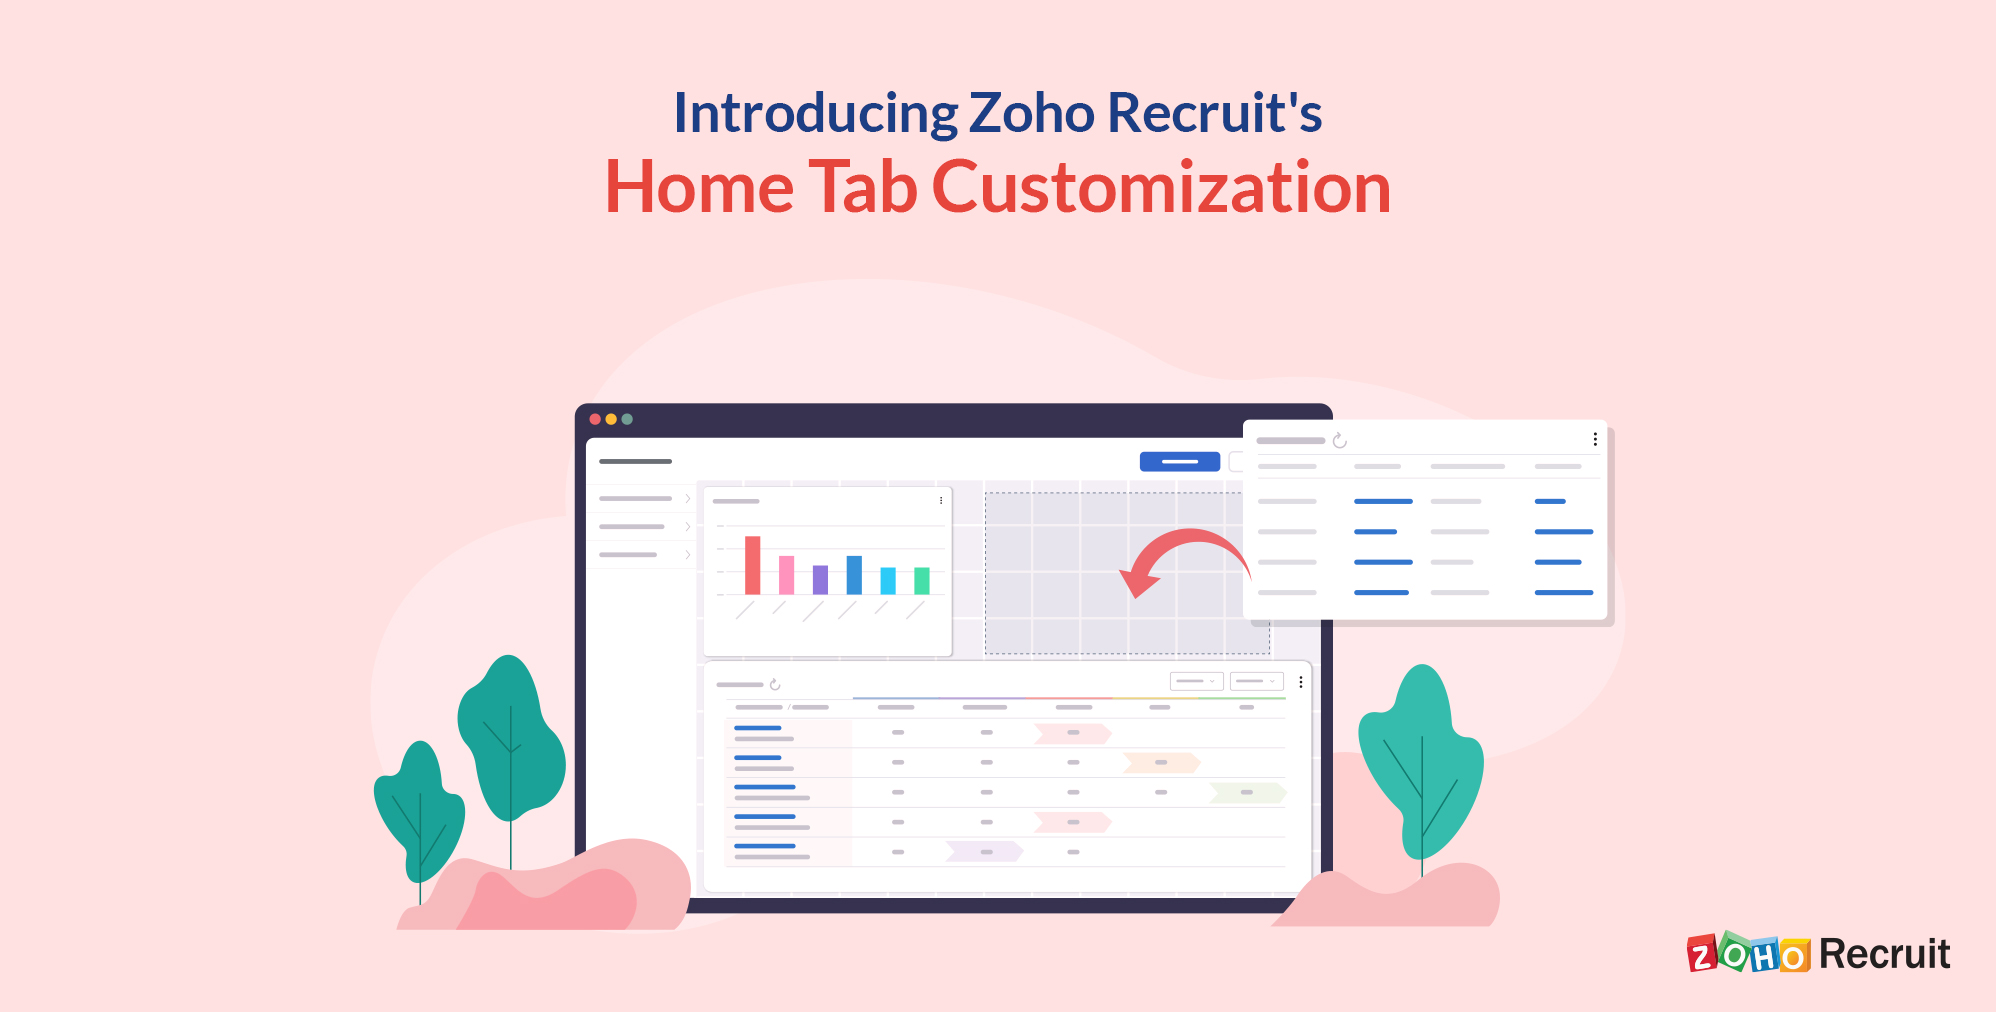 Monitor and analyze data better with Custom Home Tabs